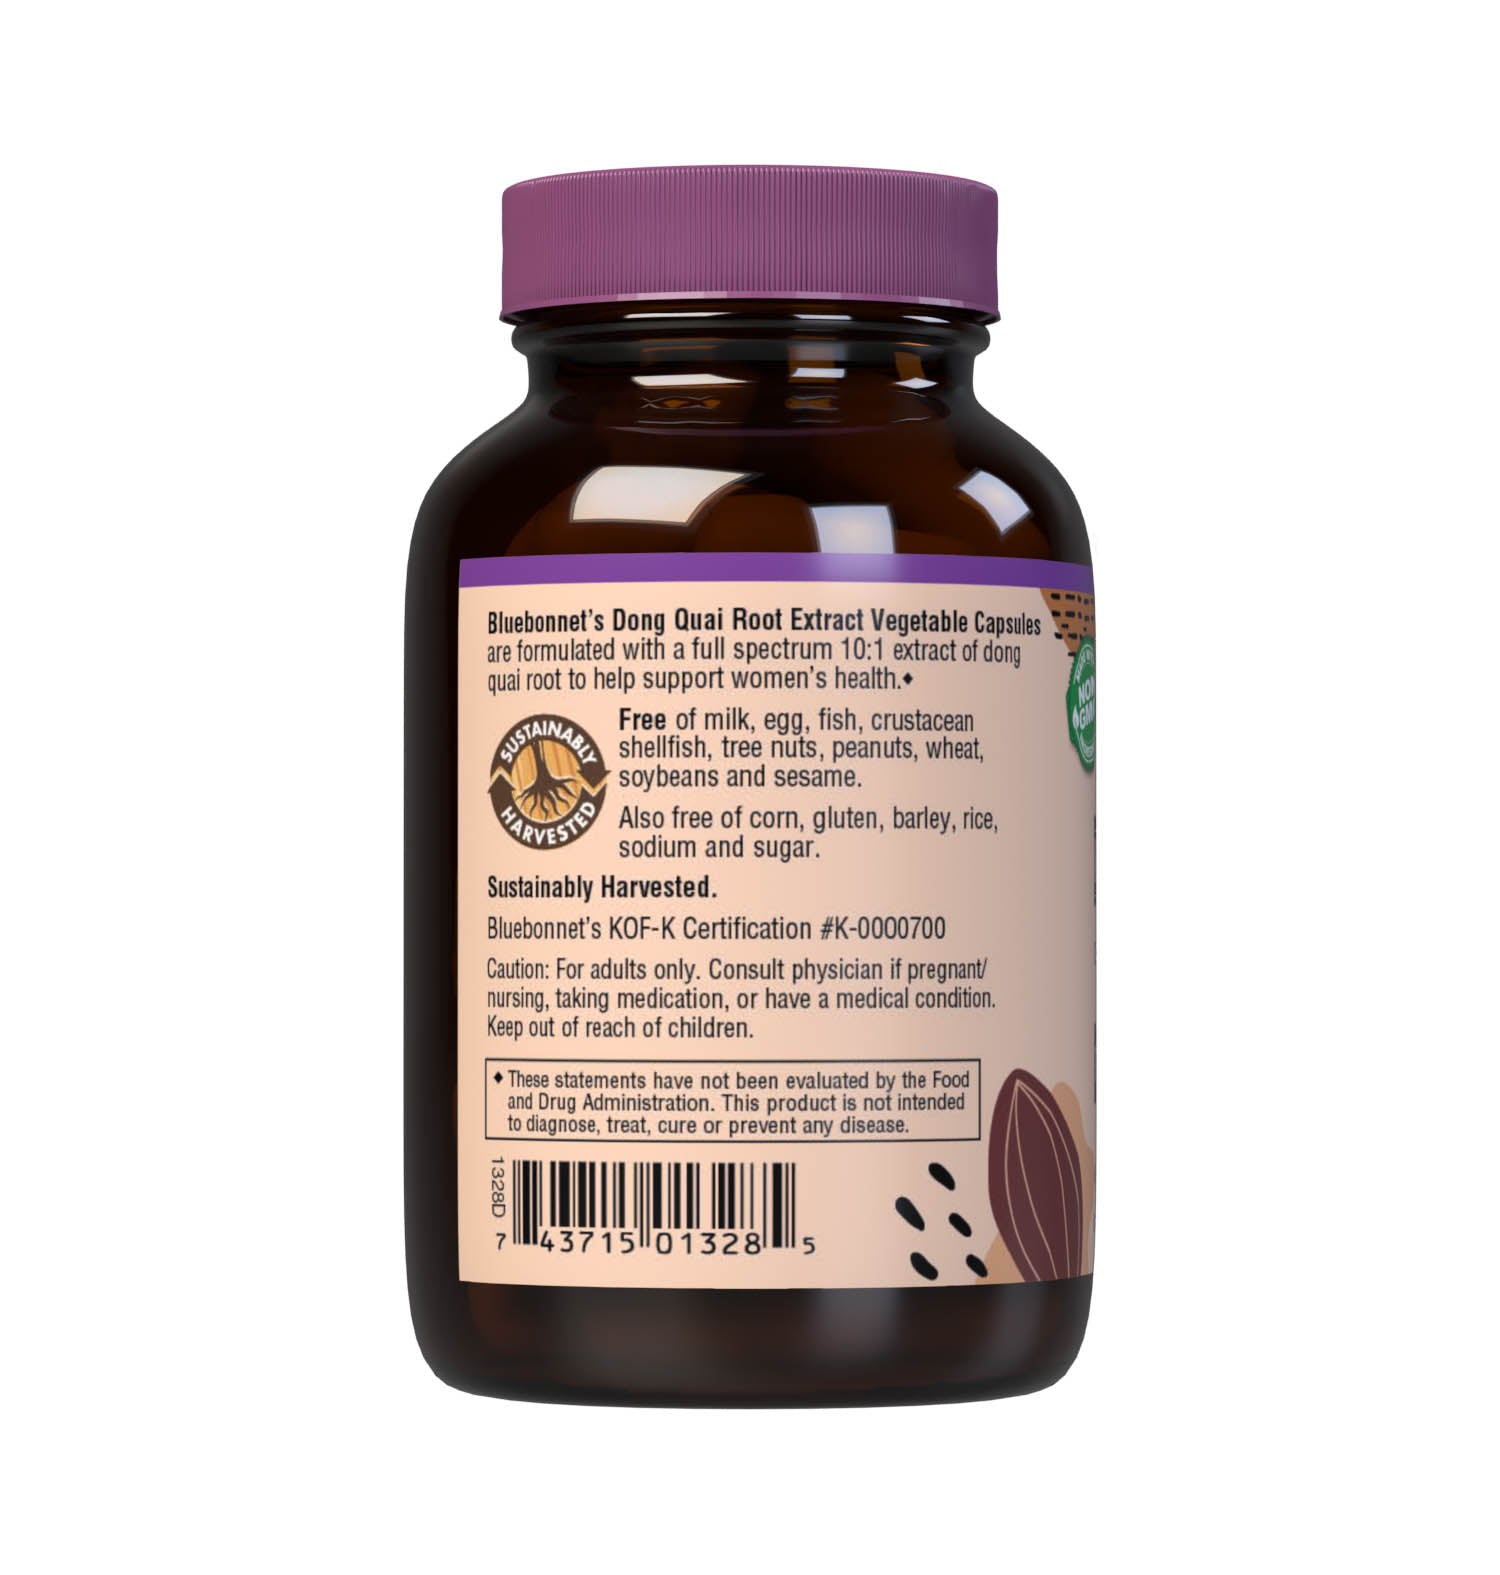 Bluebonnet’s Dong Quai Root Extract 60 Vegetable Capsules contain a full spectrum extract of dong quai root that is carefully produced by a clean and gentle water-based extraction method to capture and preserve dong quai’s most valuable components. Description panel. #size_60 count